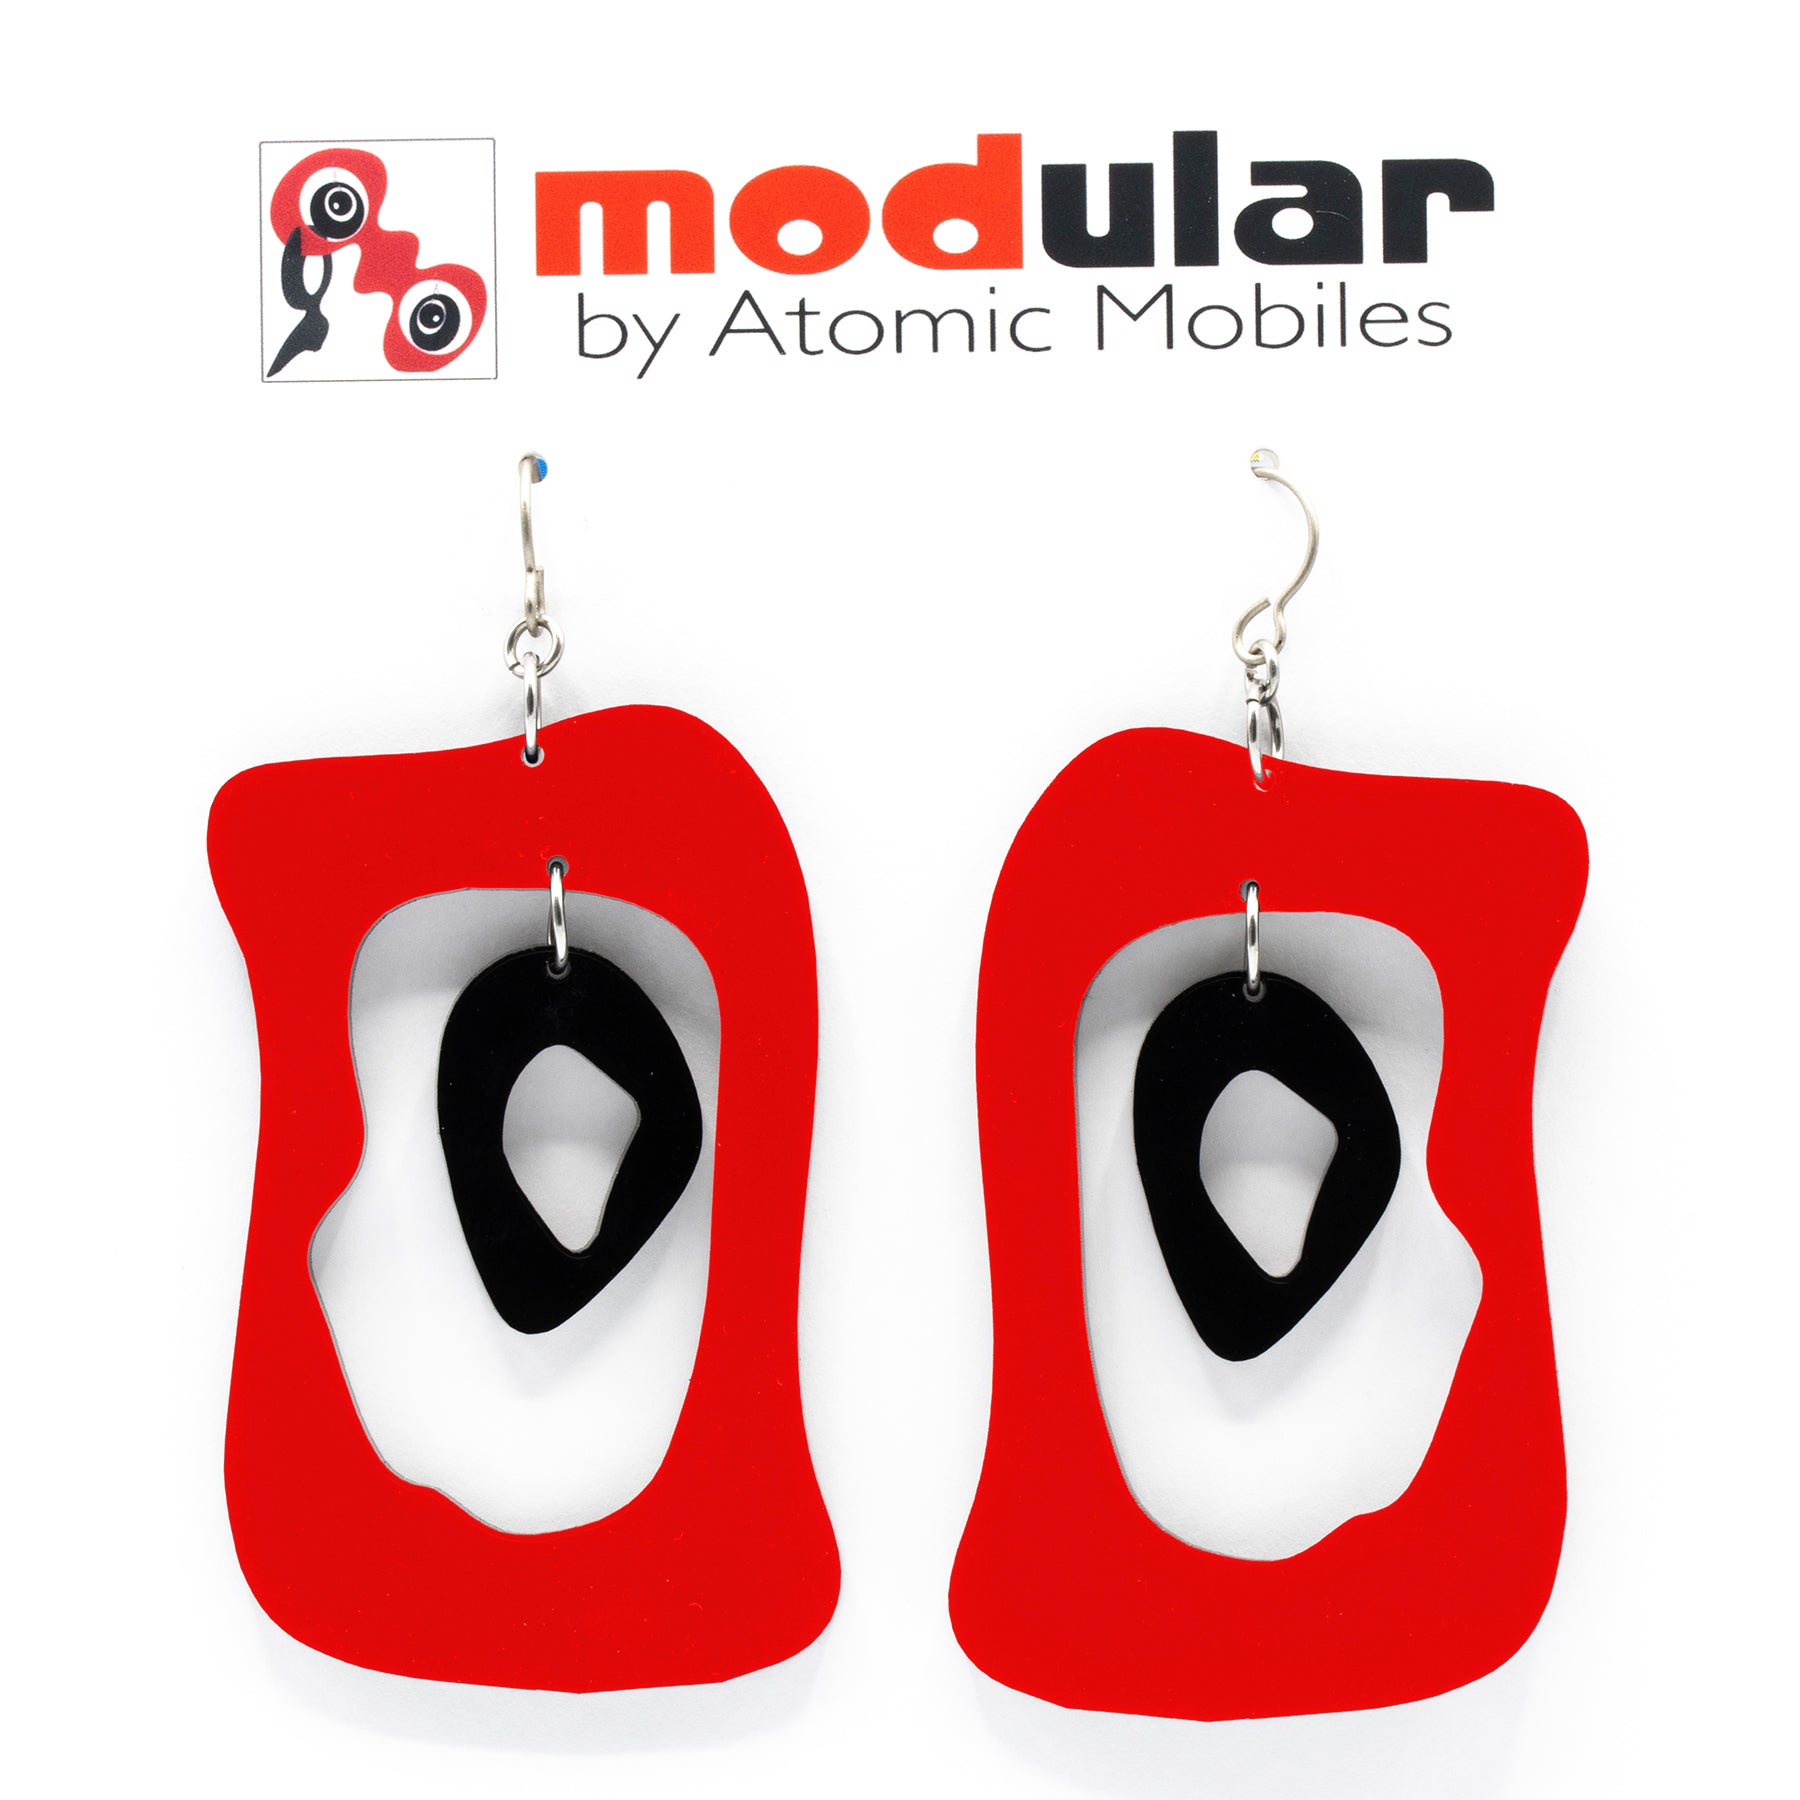 MODular Earrings - Modern Bliss Statement Earrings in Red and Black by AtomicMobiles.com - retro era inspired mod handmade jewelry